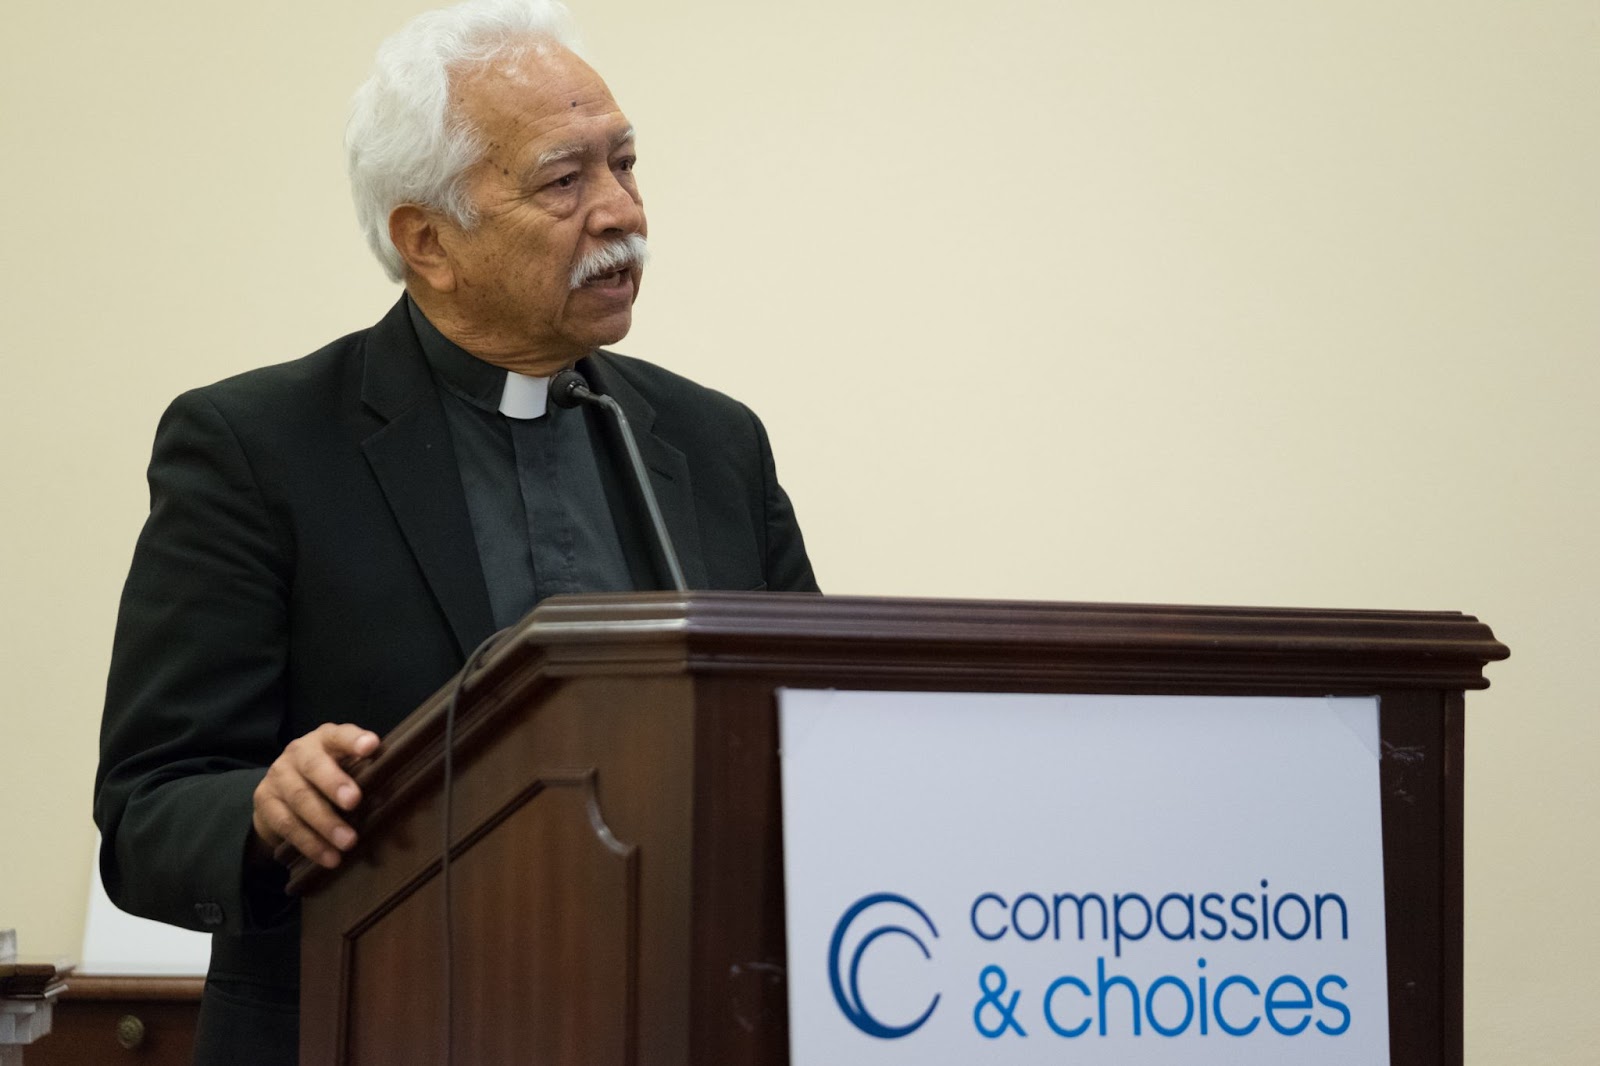 Reverend Castuera stands at a podium with a Compassion & Choices sign.